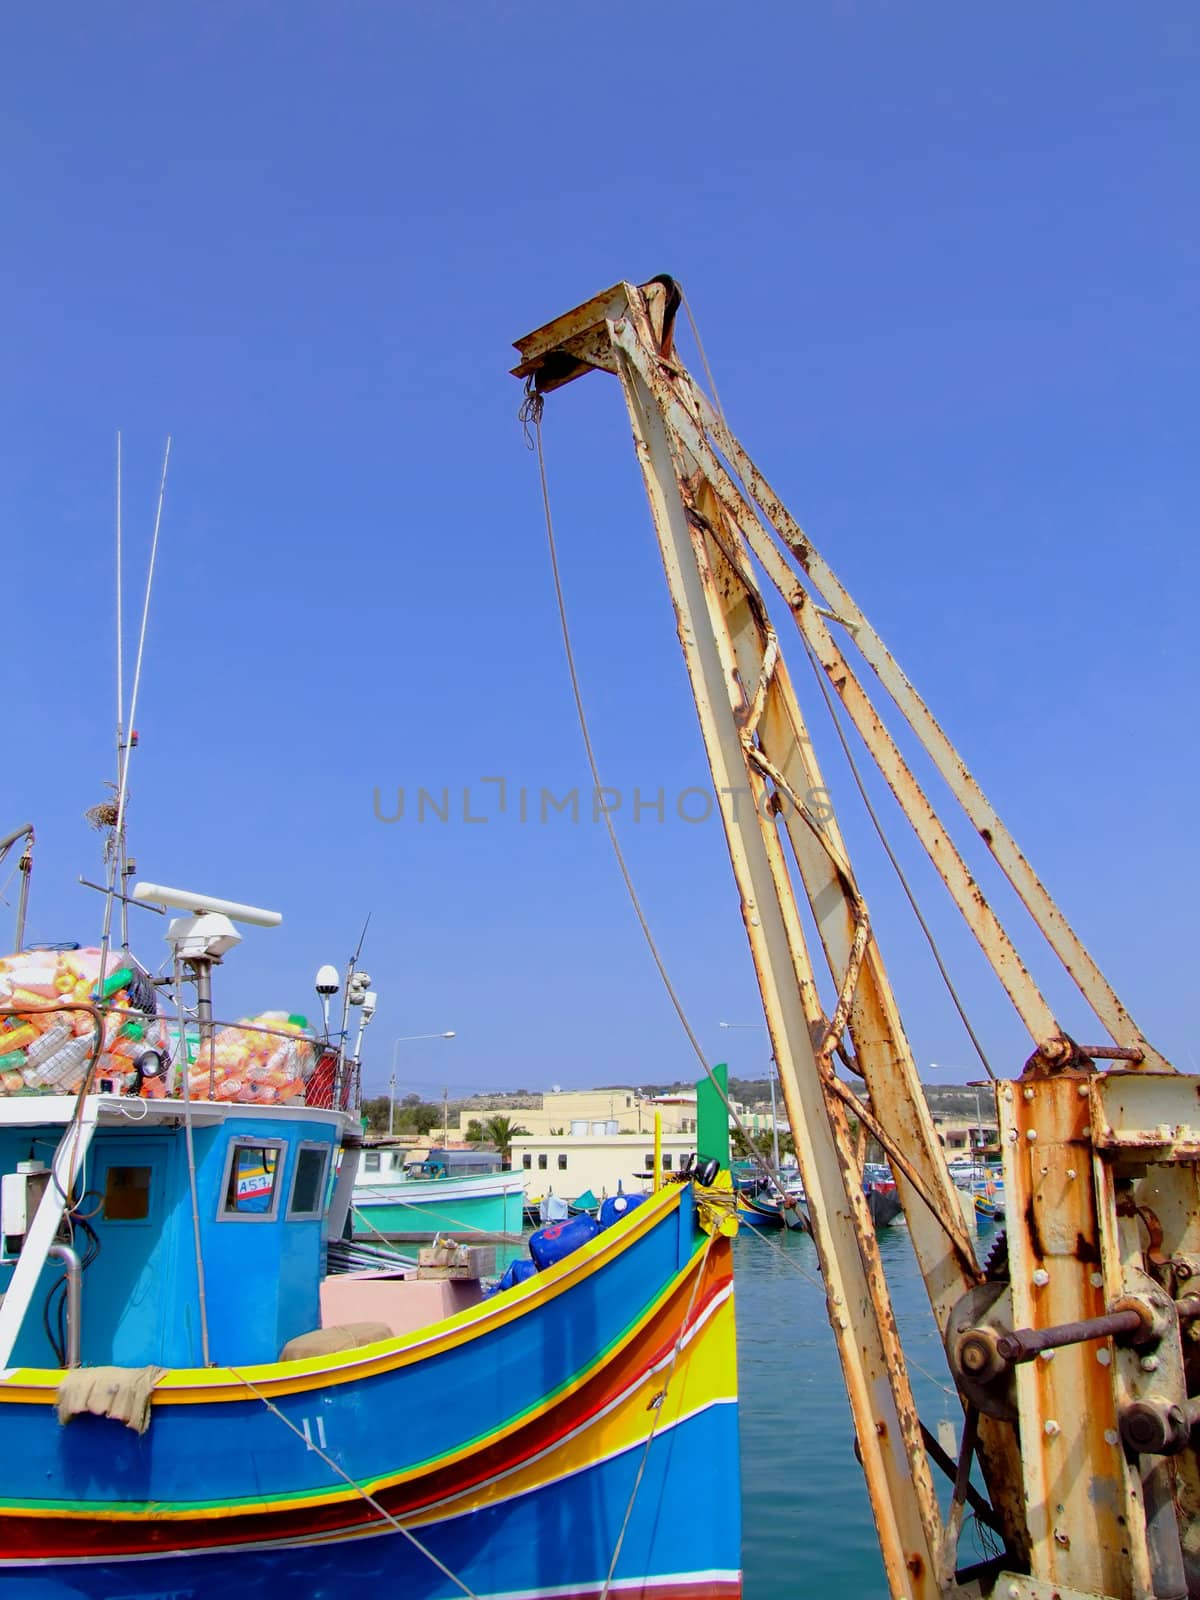 Trawler series - details of industrial fishing trawlers moored or out at sea. This one moored near hoist crane